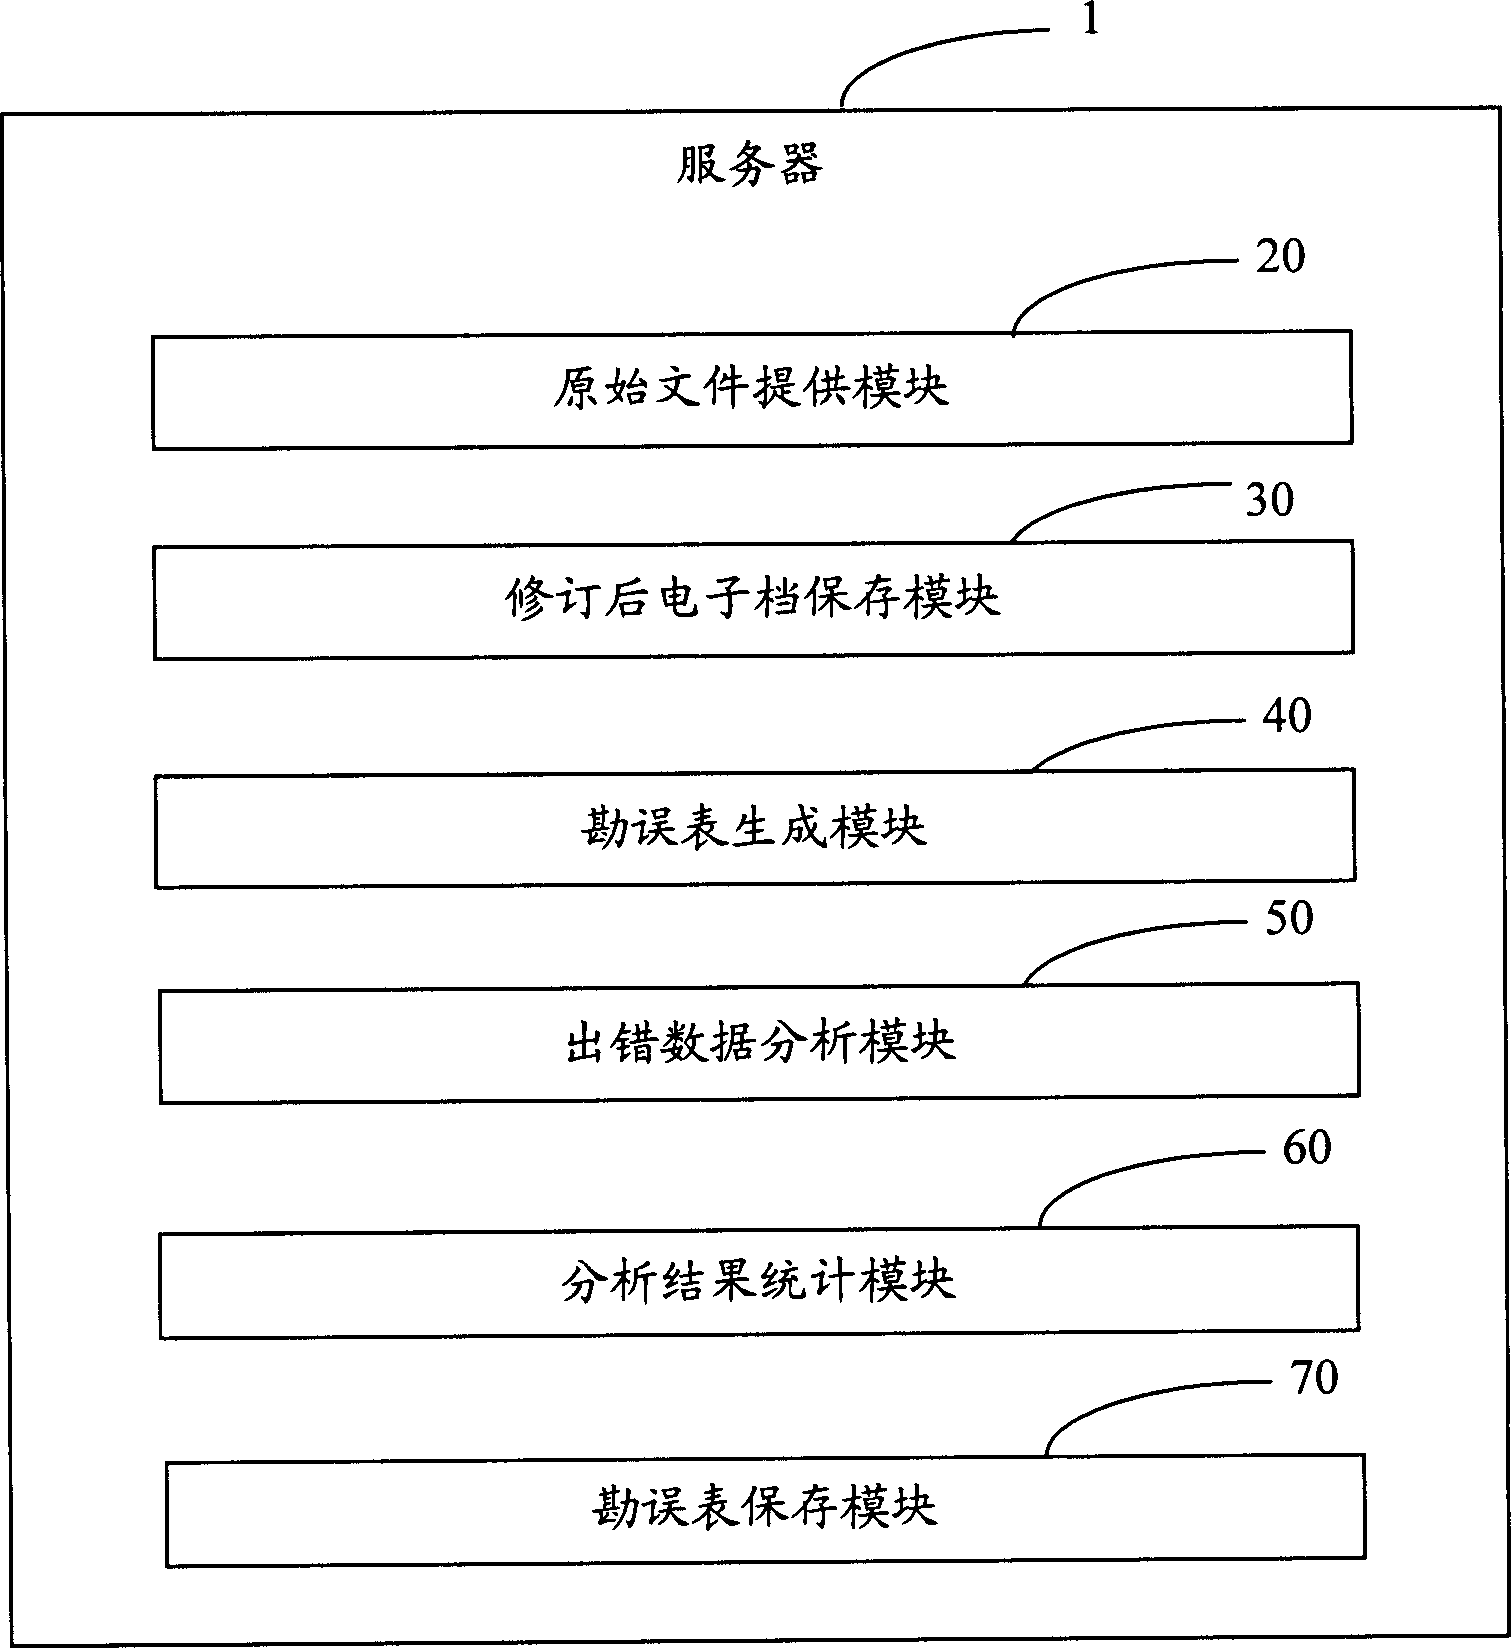 Automatic error-list generating system and method